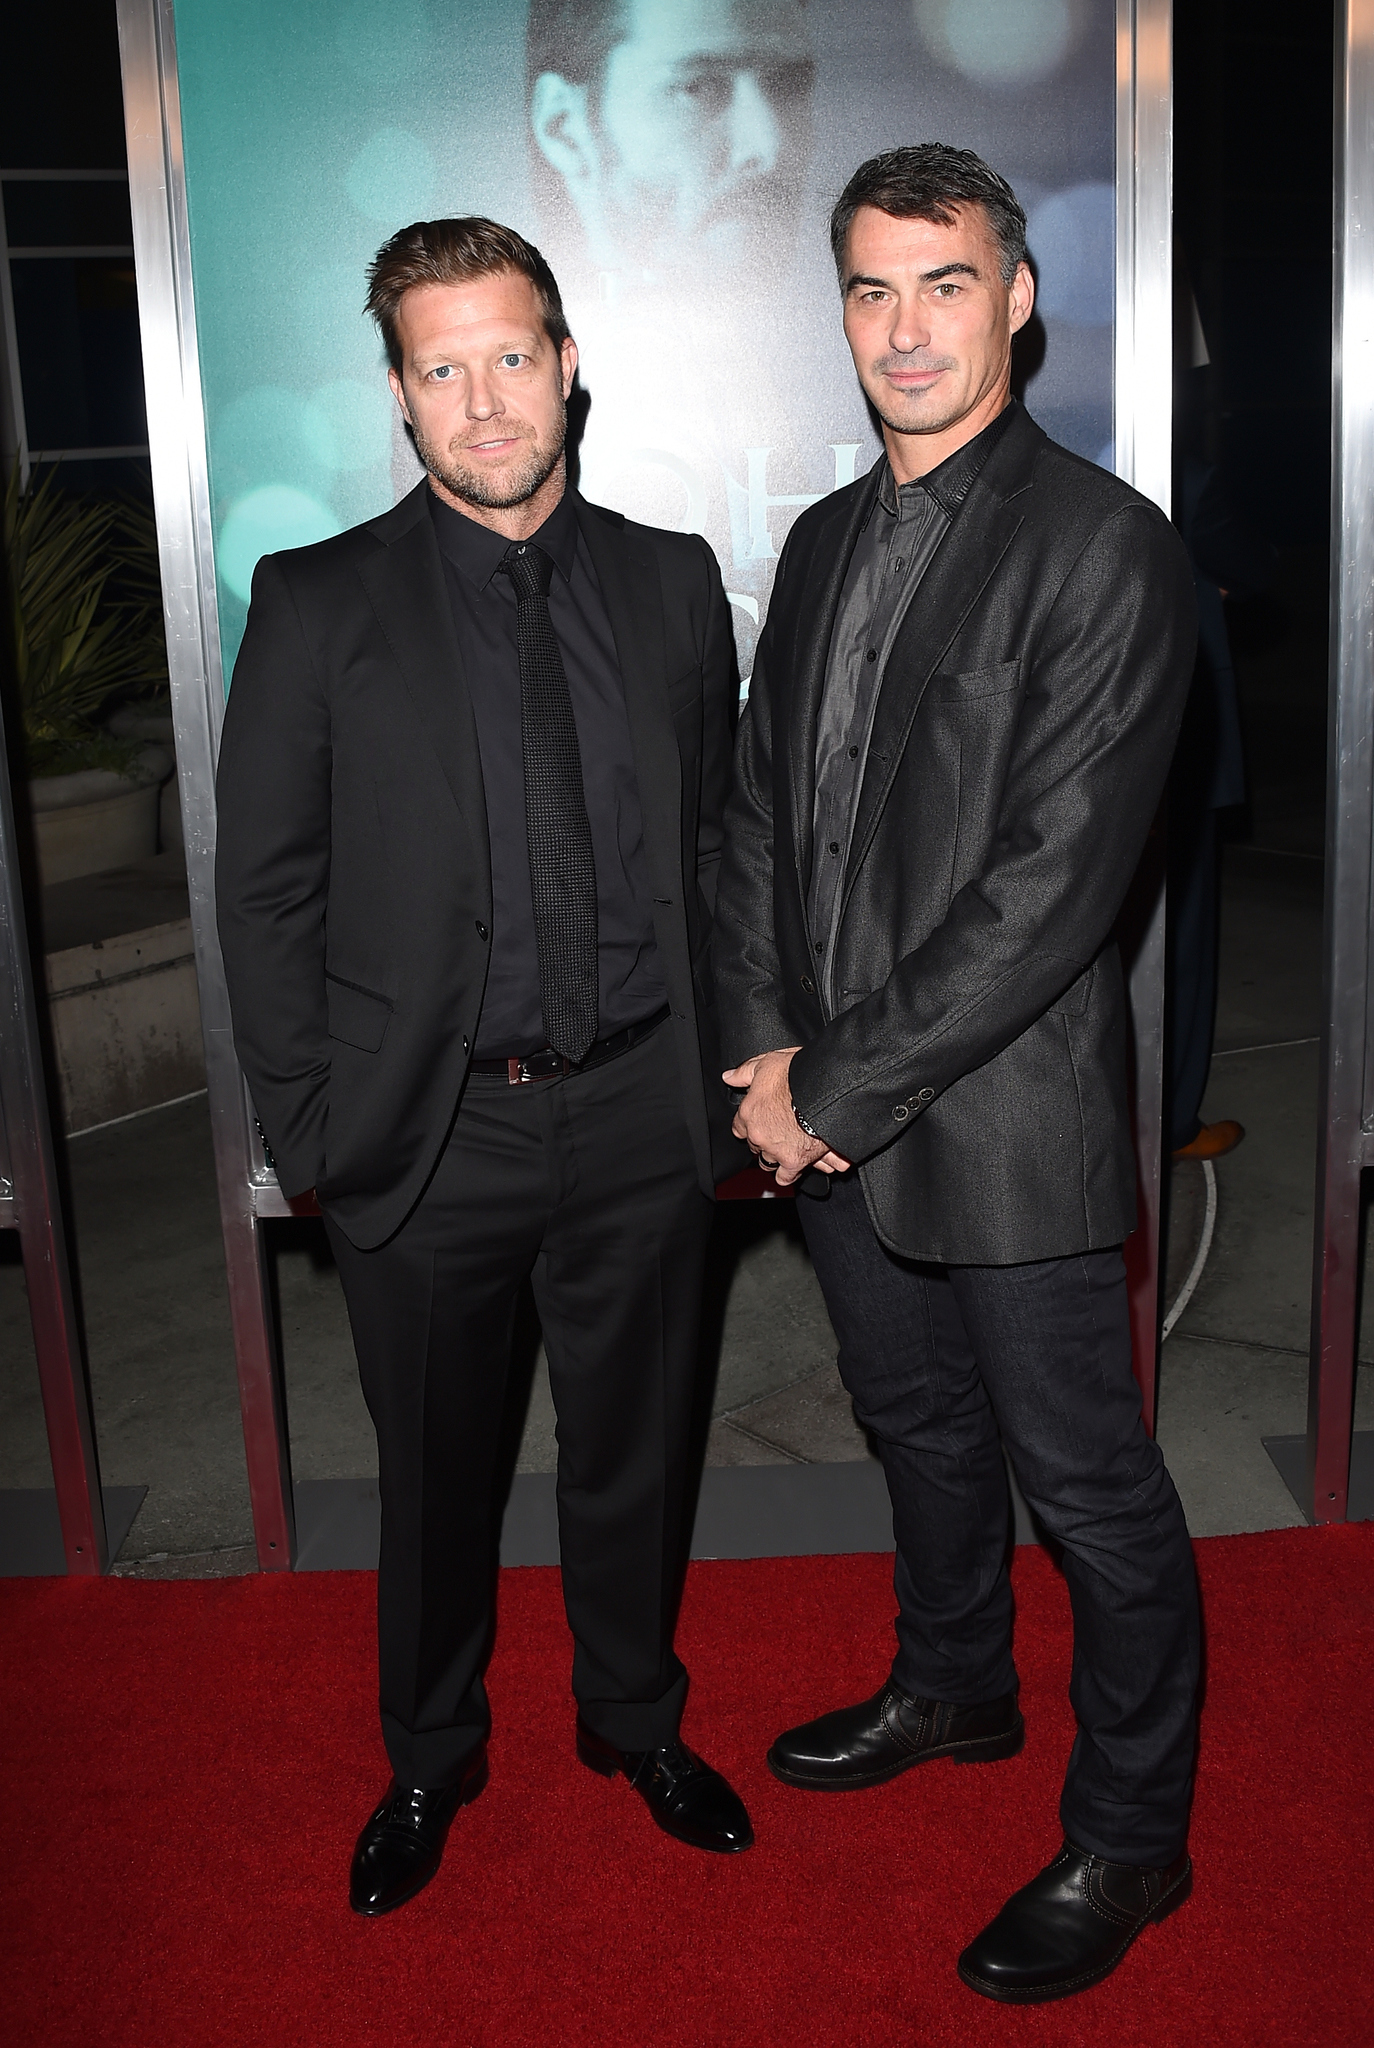 David Leitch and Chad Stahelski at event of John Wick (2014)